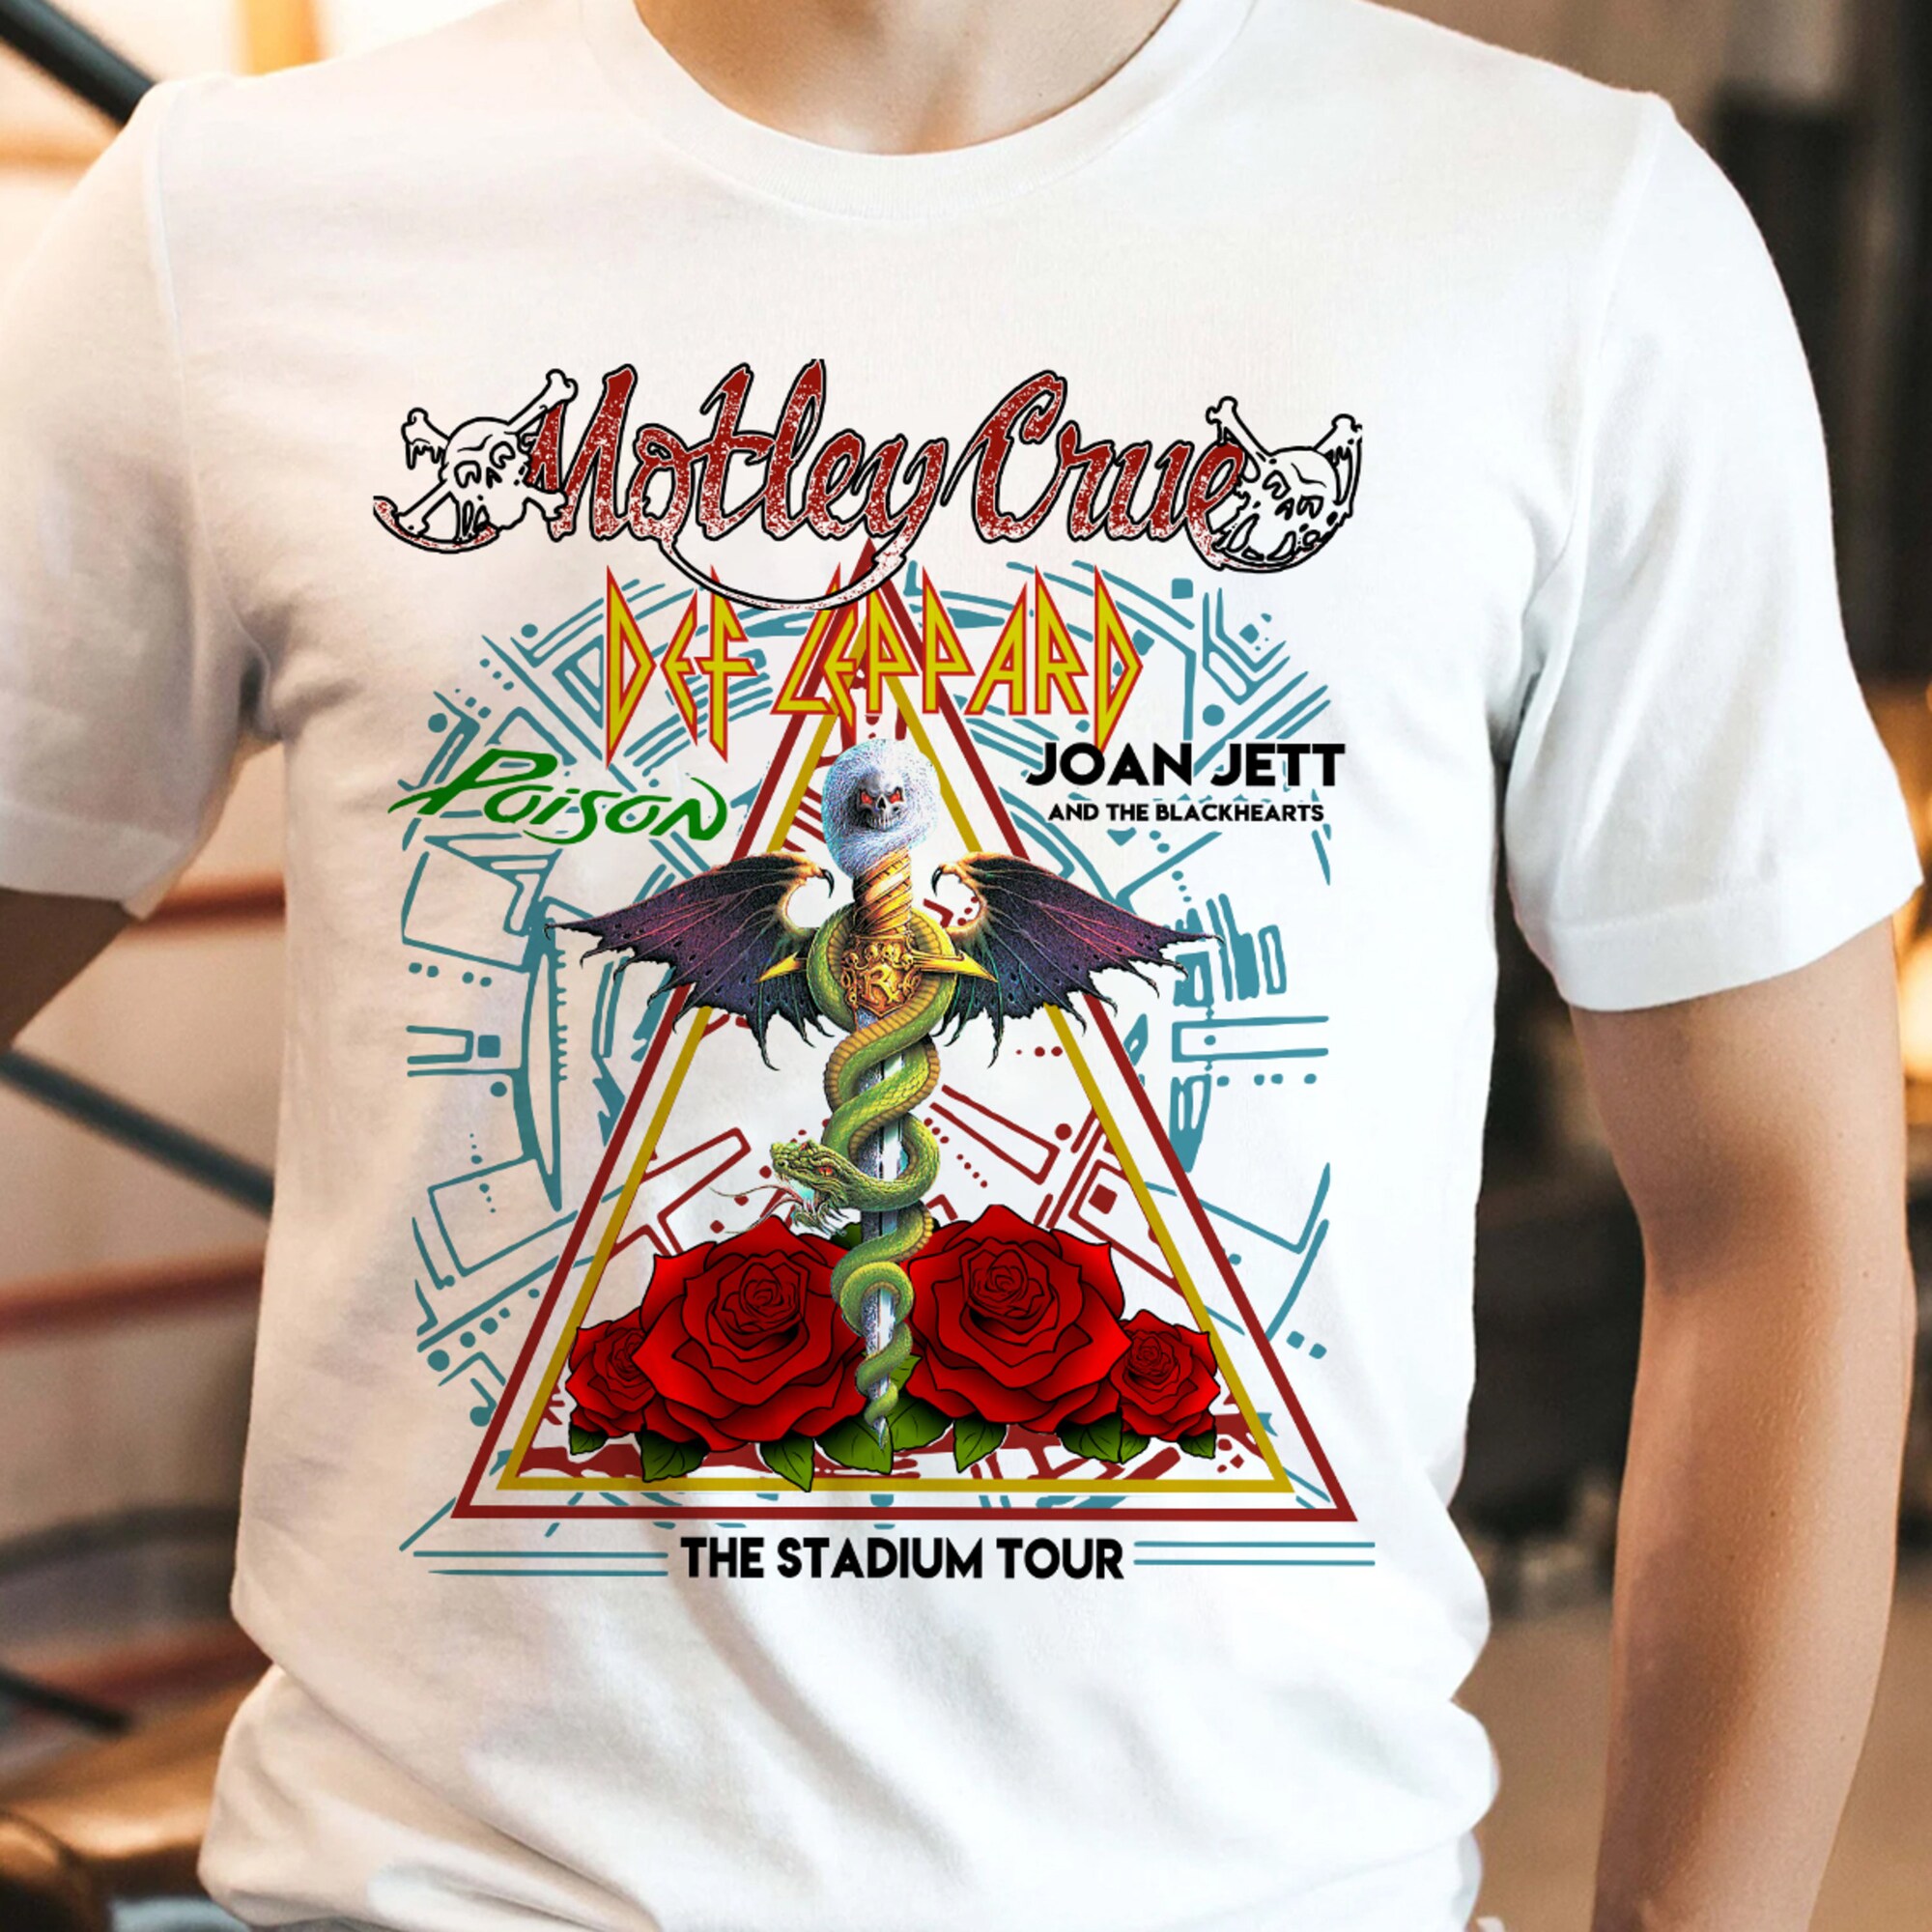 Discover The Stadium Tour Motley Cruee Deff Leppard T-shirt - Poison Joan Jettt And The Blackhearts T-shirt